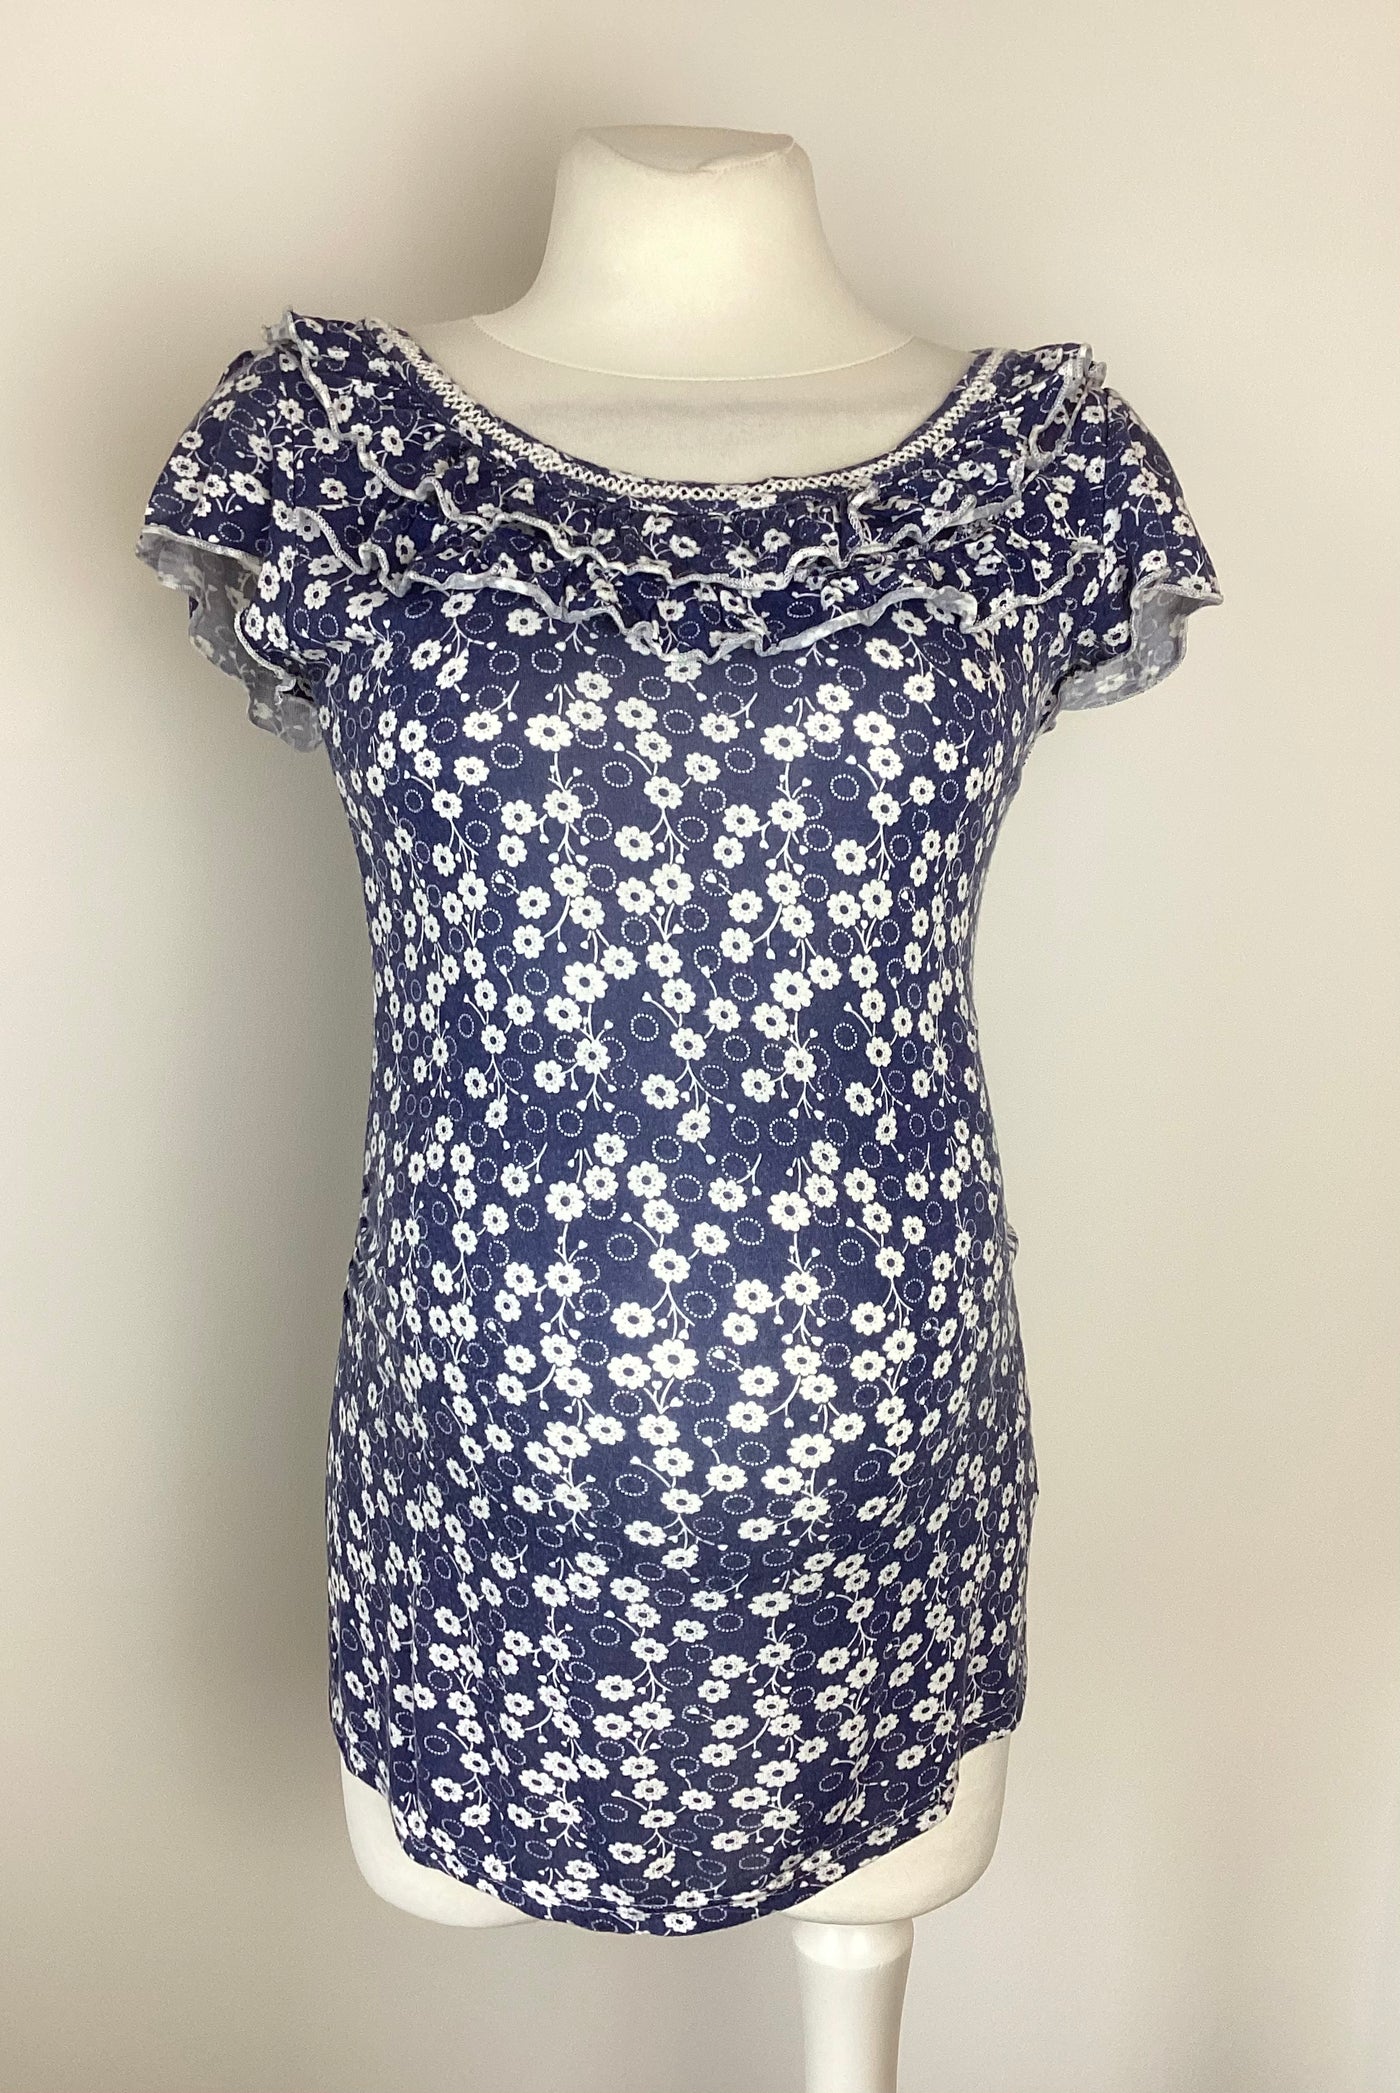 New Look Maternity dark blue & white floral cap sleeve top with frill collar detail - Size 8